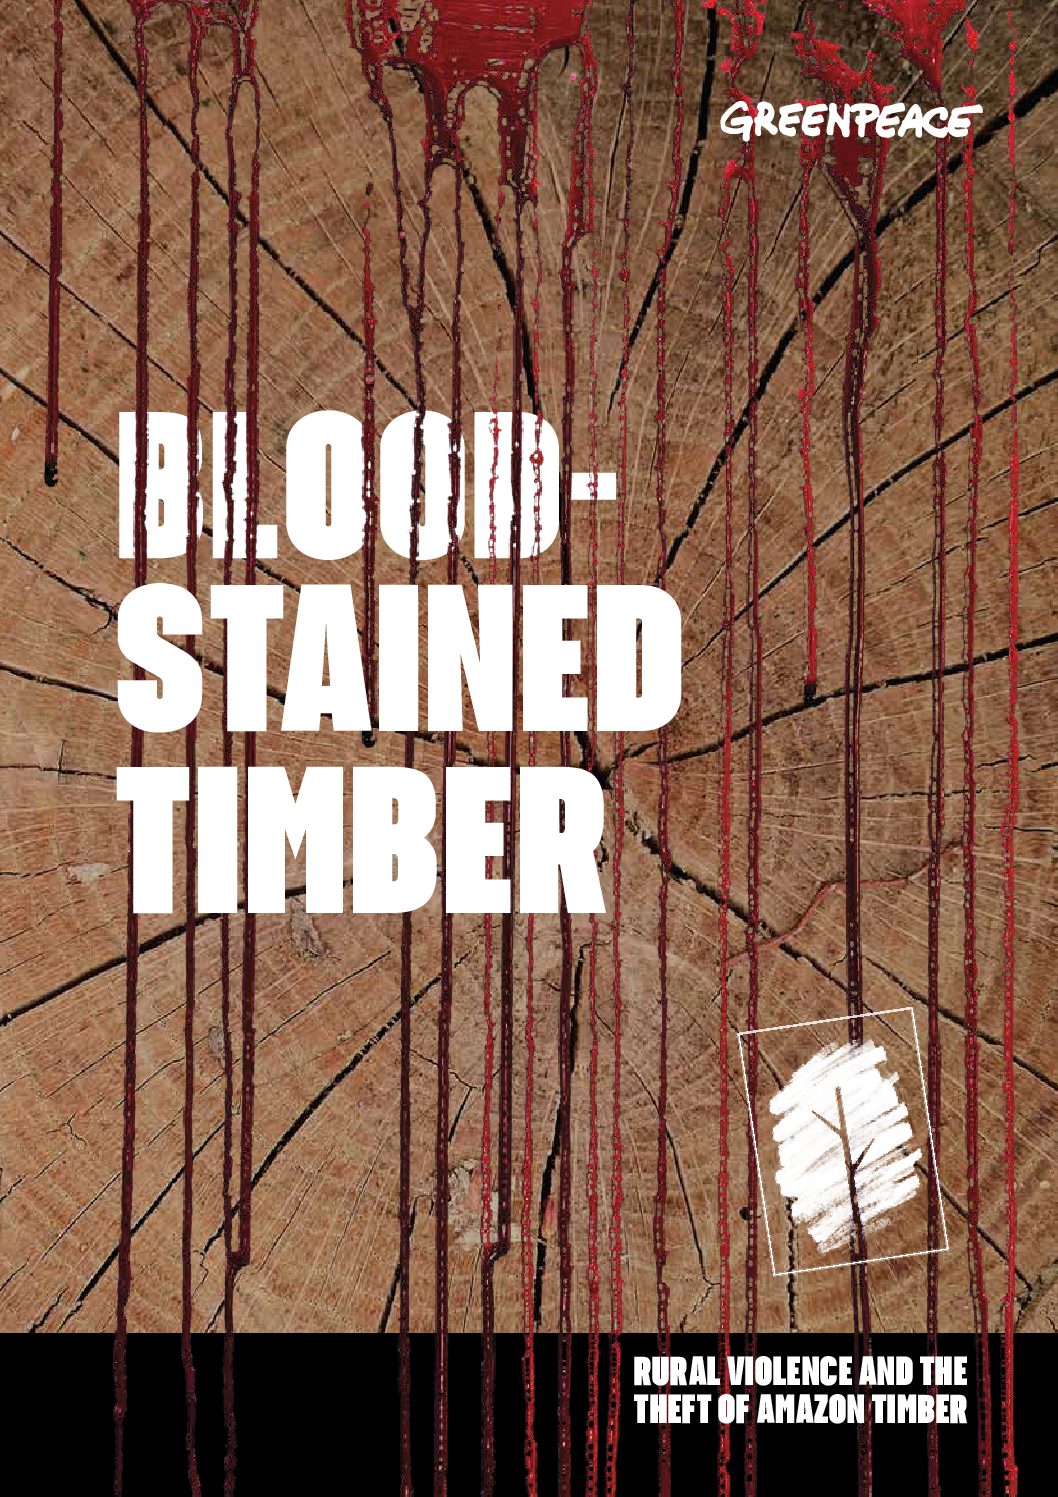 [REPORT] Blood-stained timber : rural violence and the theft of Amazon timber